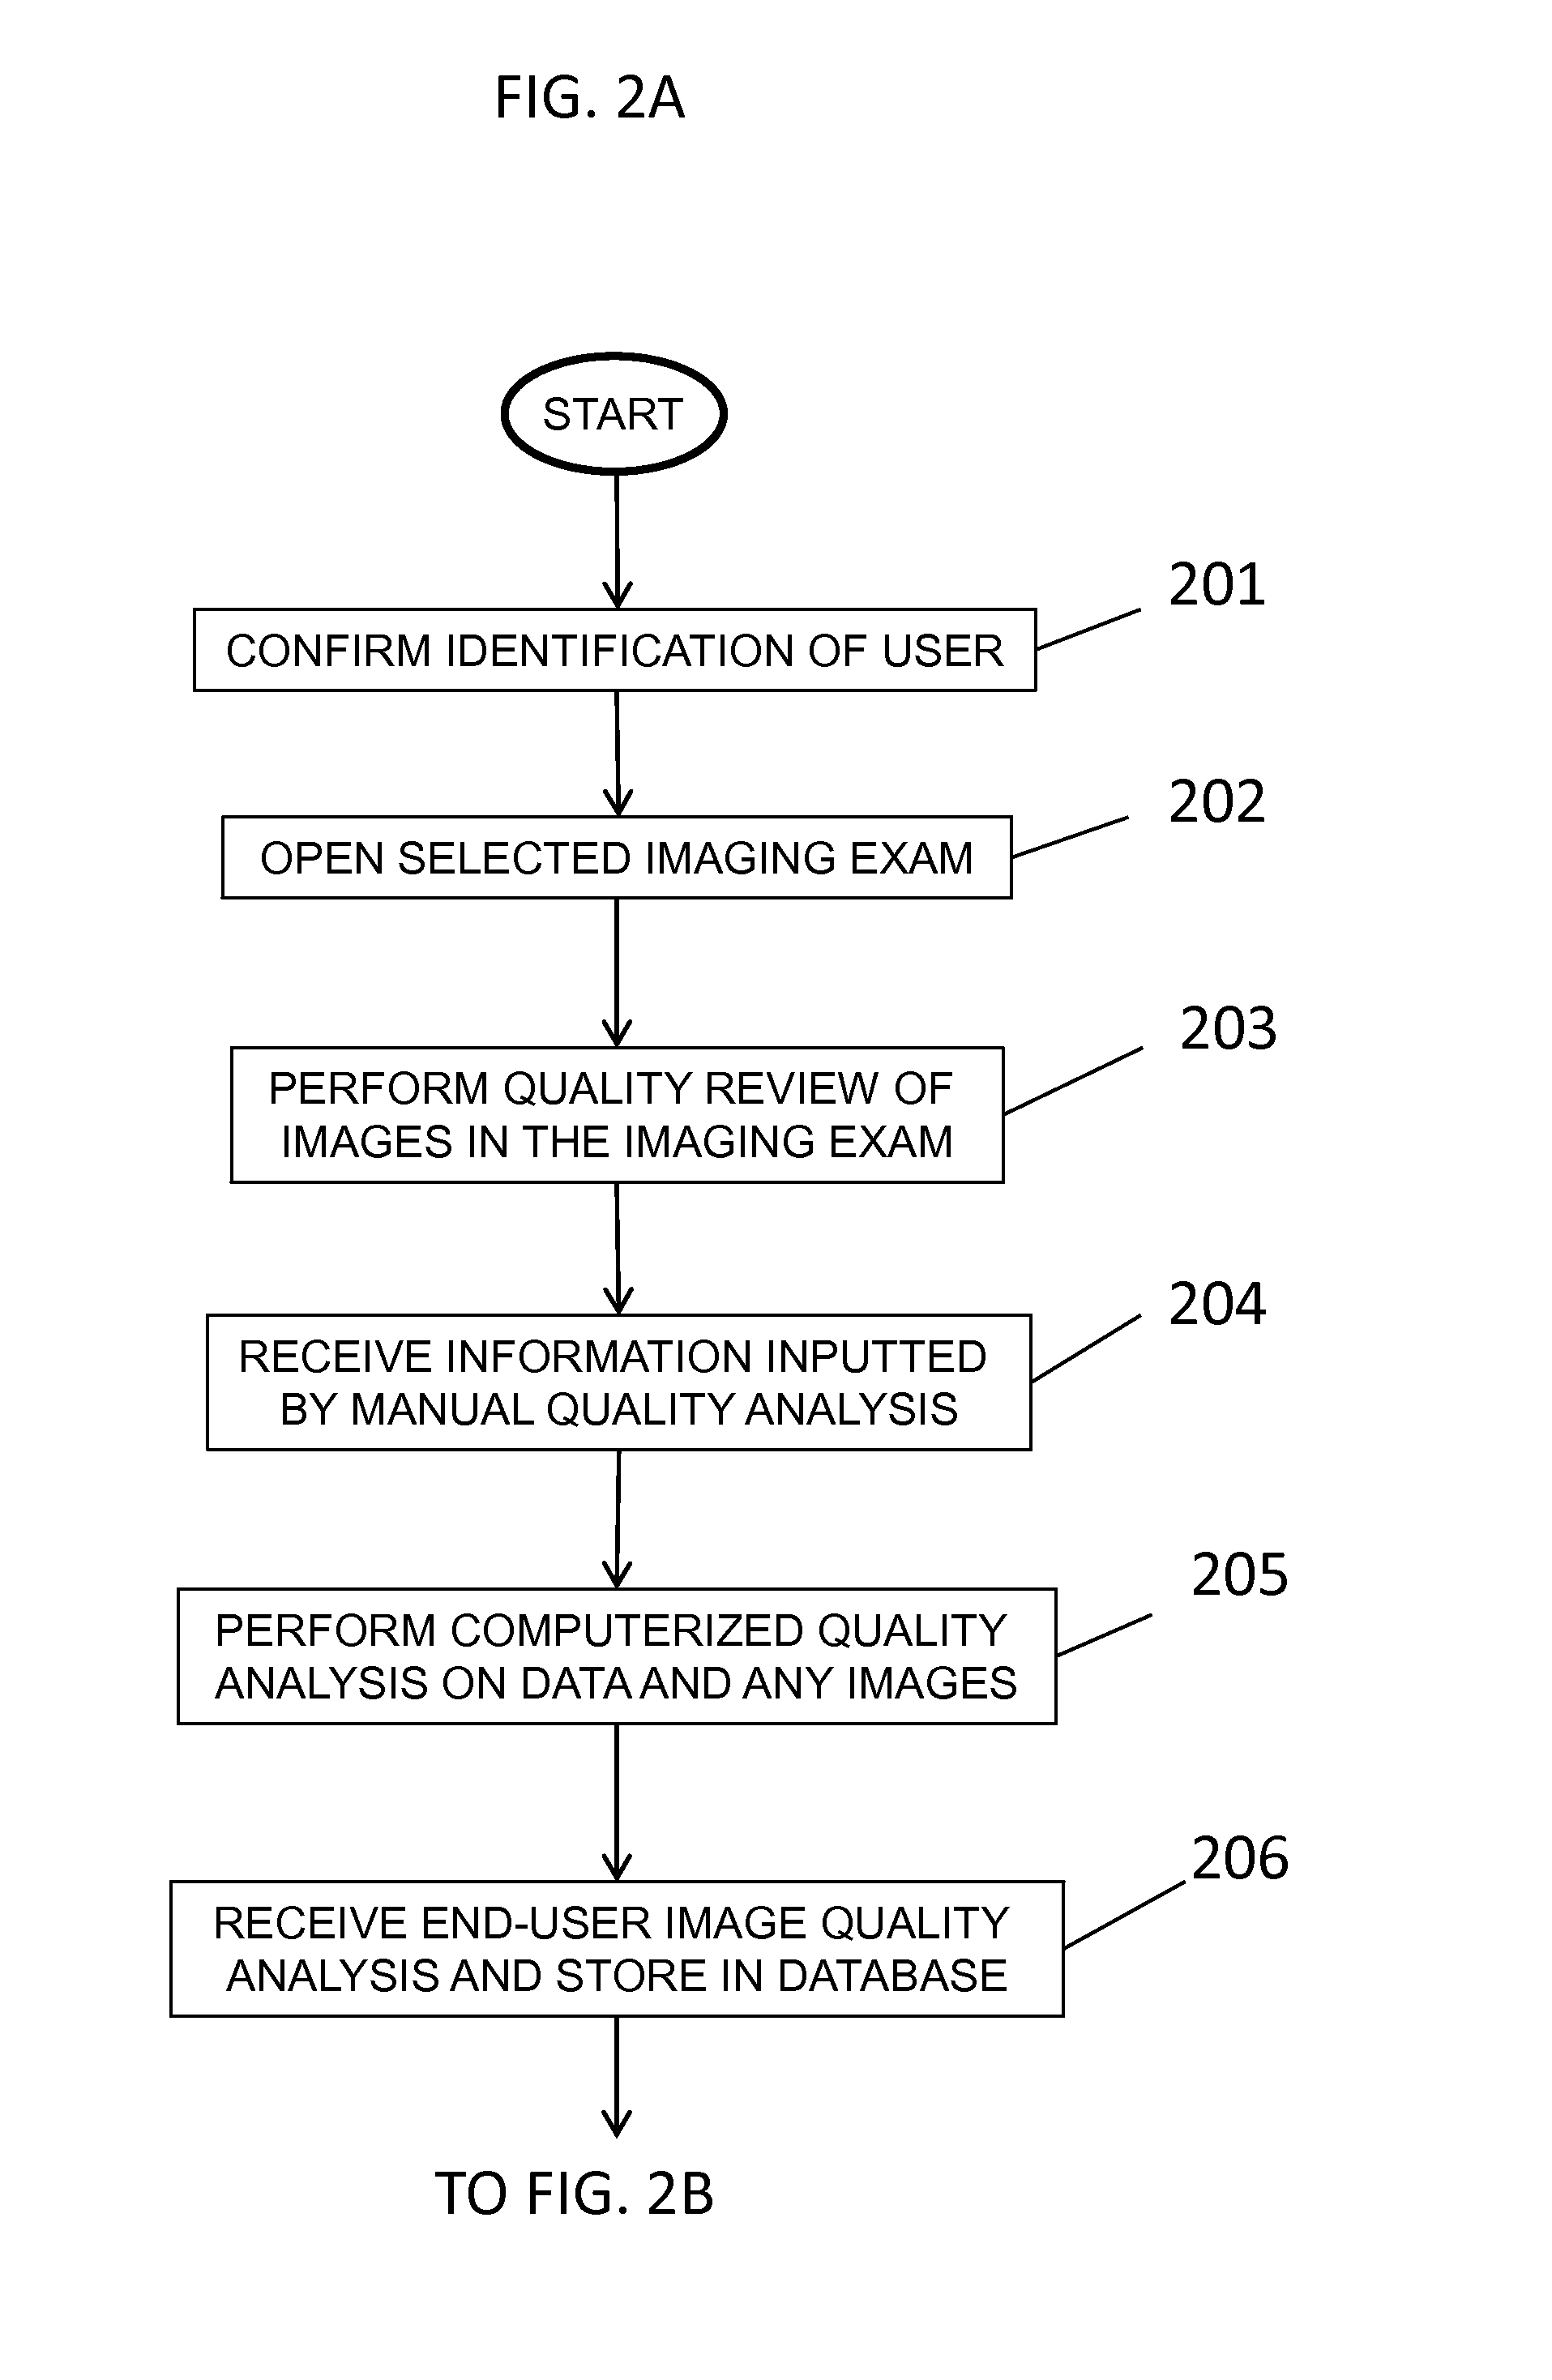 Method and apparatus for image-centric standardized tool for quality assurance analysis in medical imaging